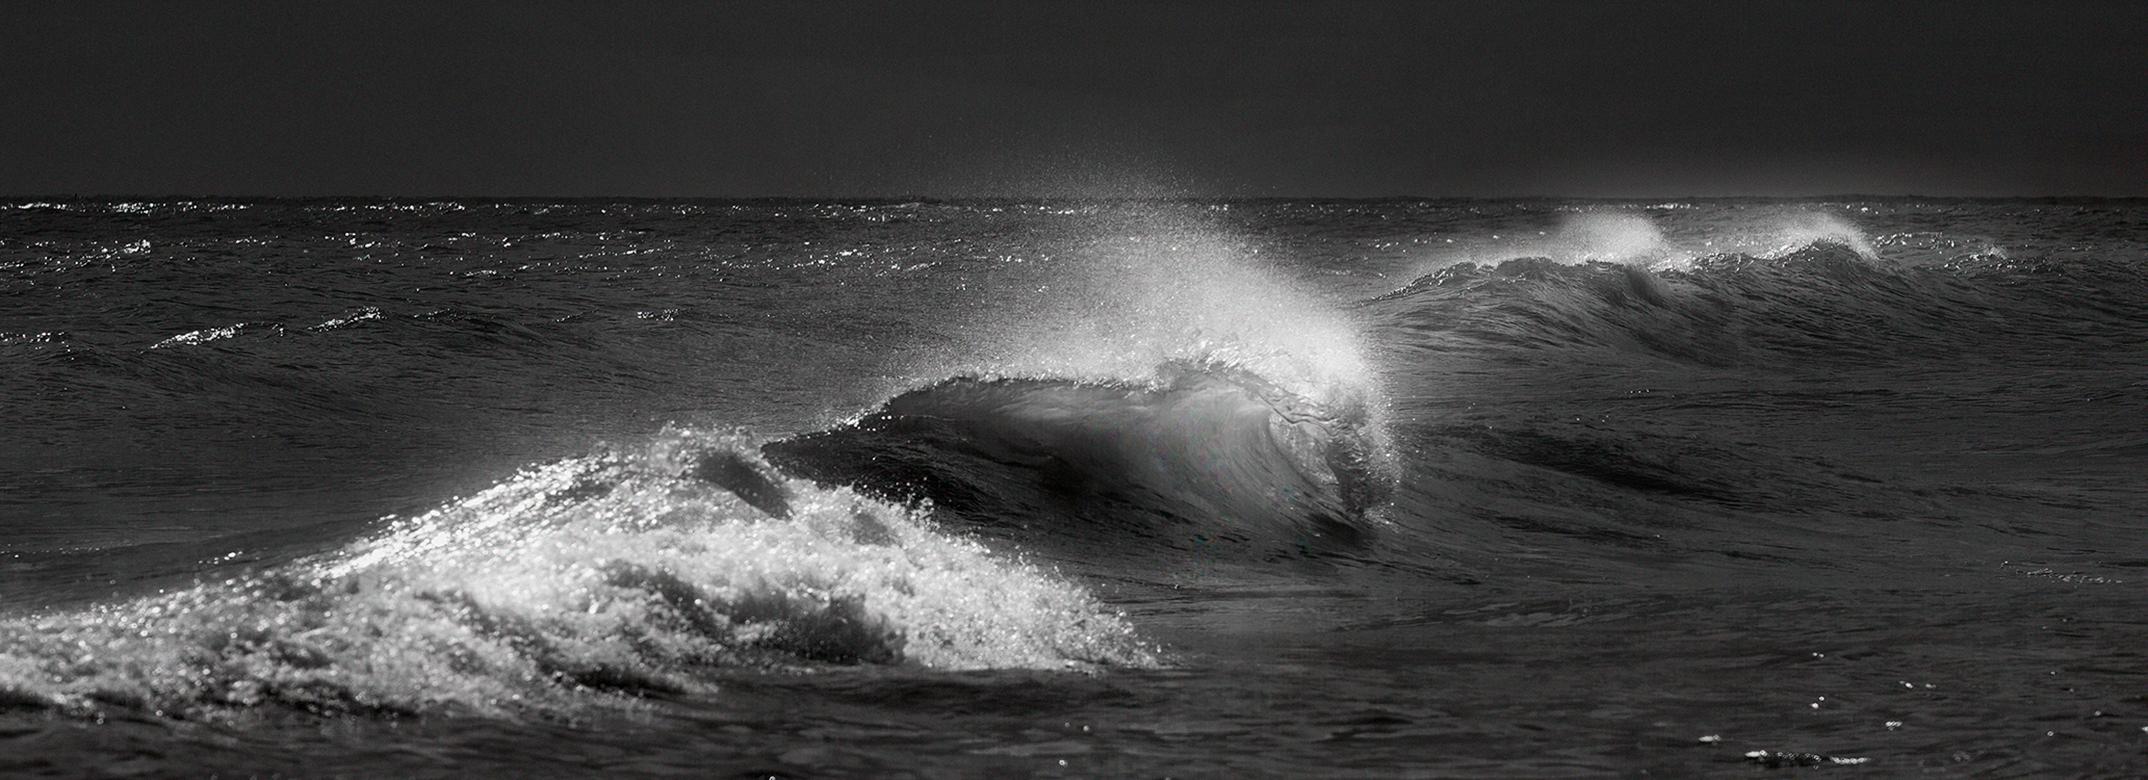 Signed limited edition seascape print, Black white, Oversize sea photo - Embruns - Photograph by Ian Sanderson